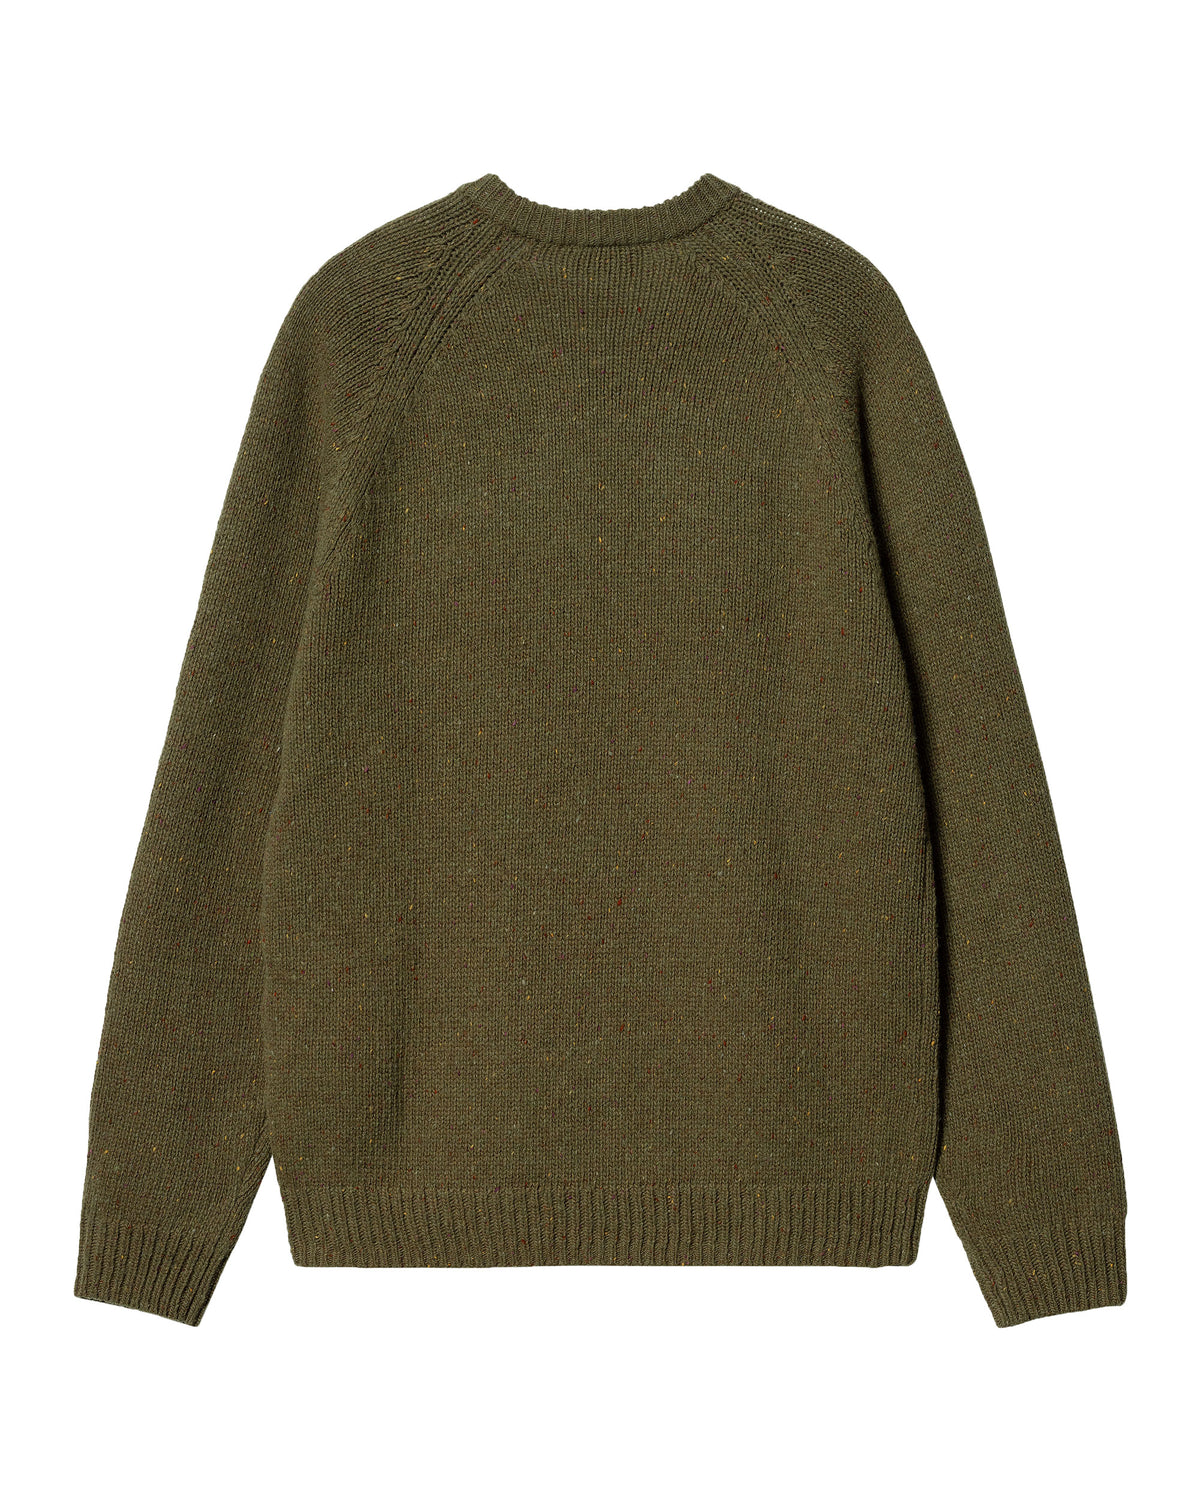 Carhartt Wip Anglistic Sweater Speckled Highland